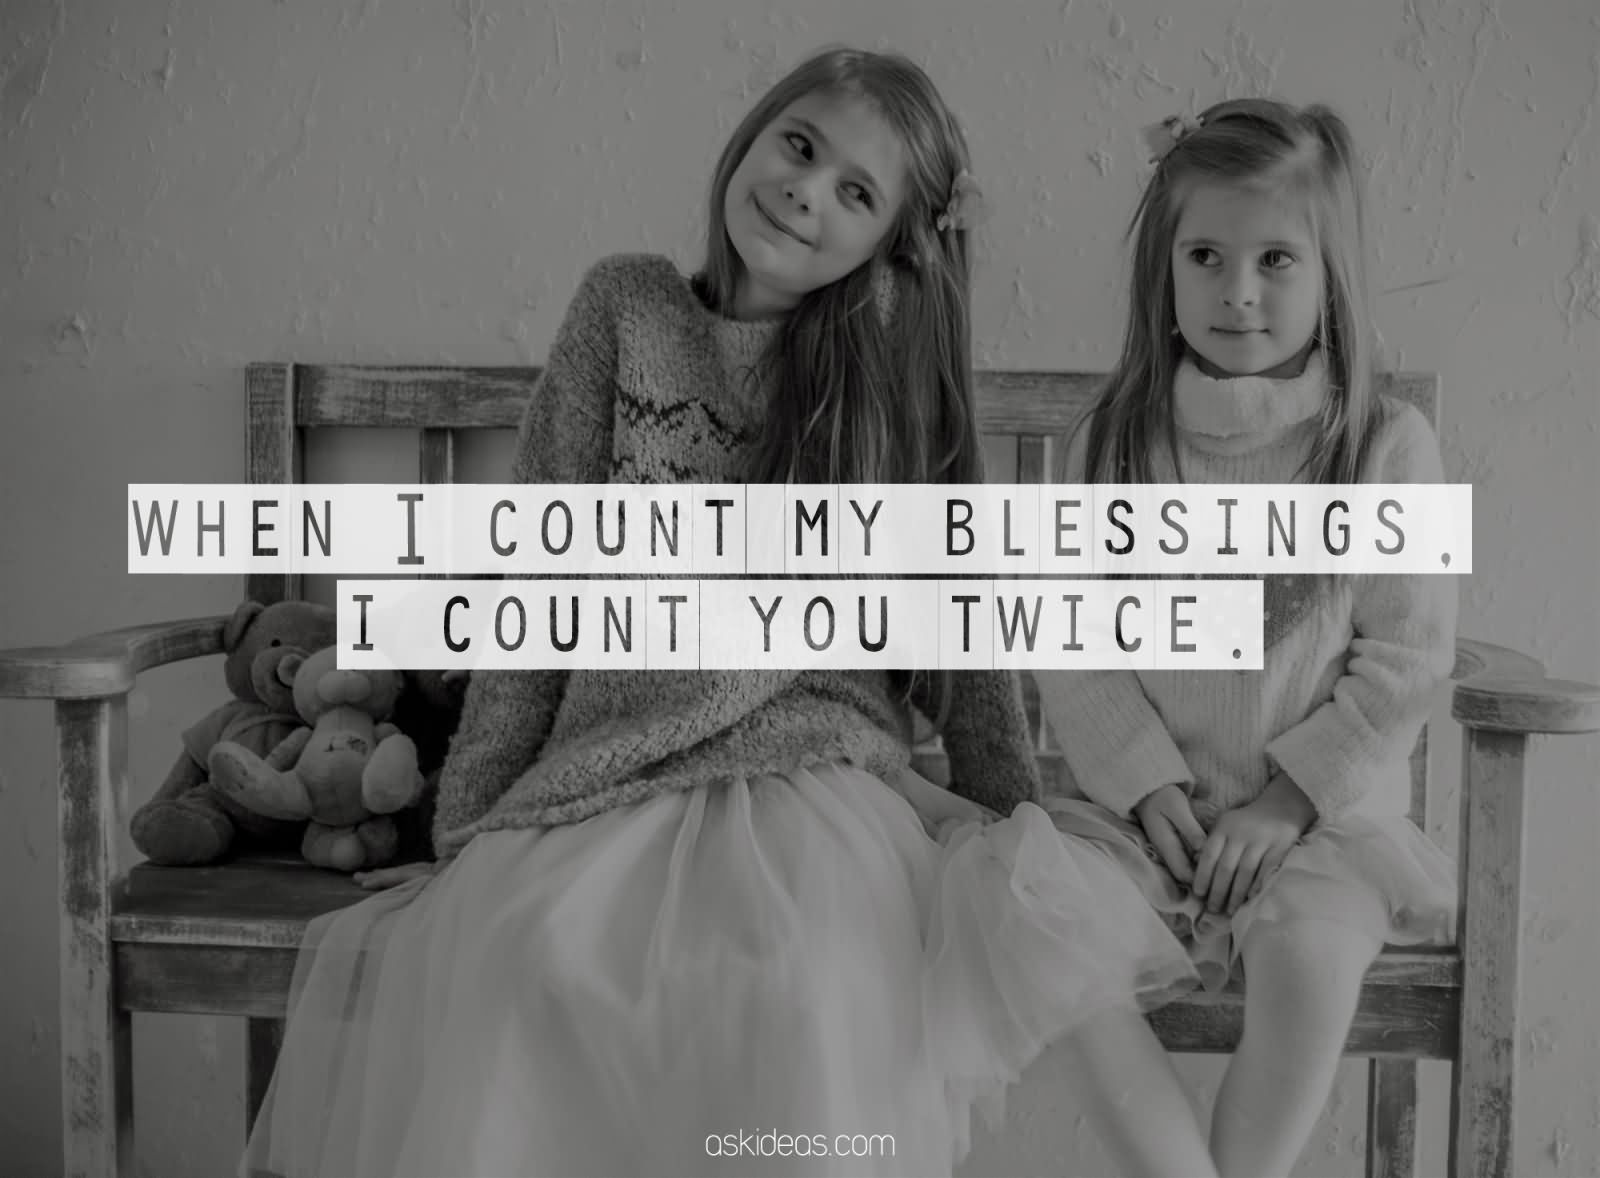 When I count my blessings, I count you twice.